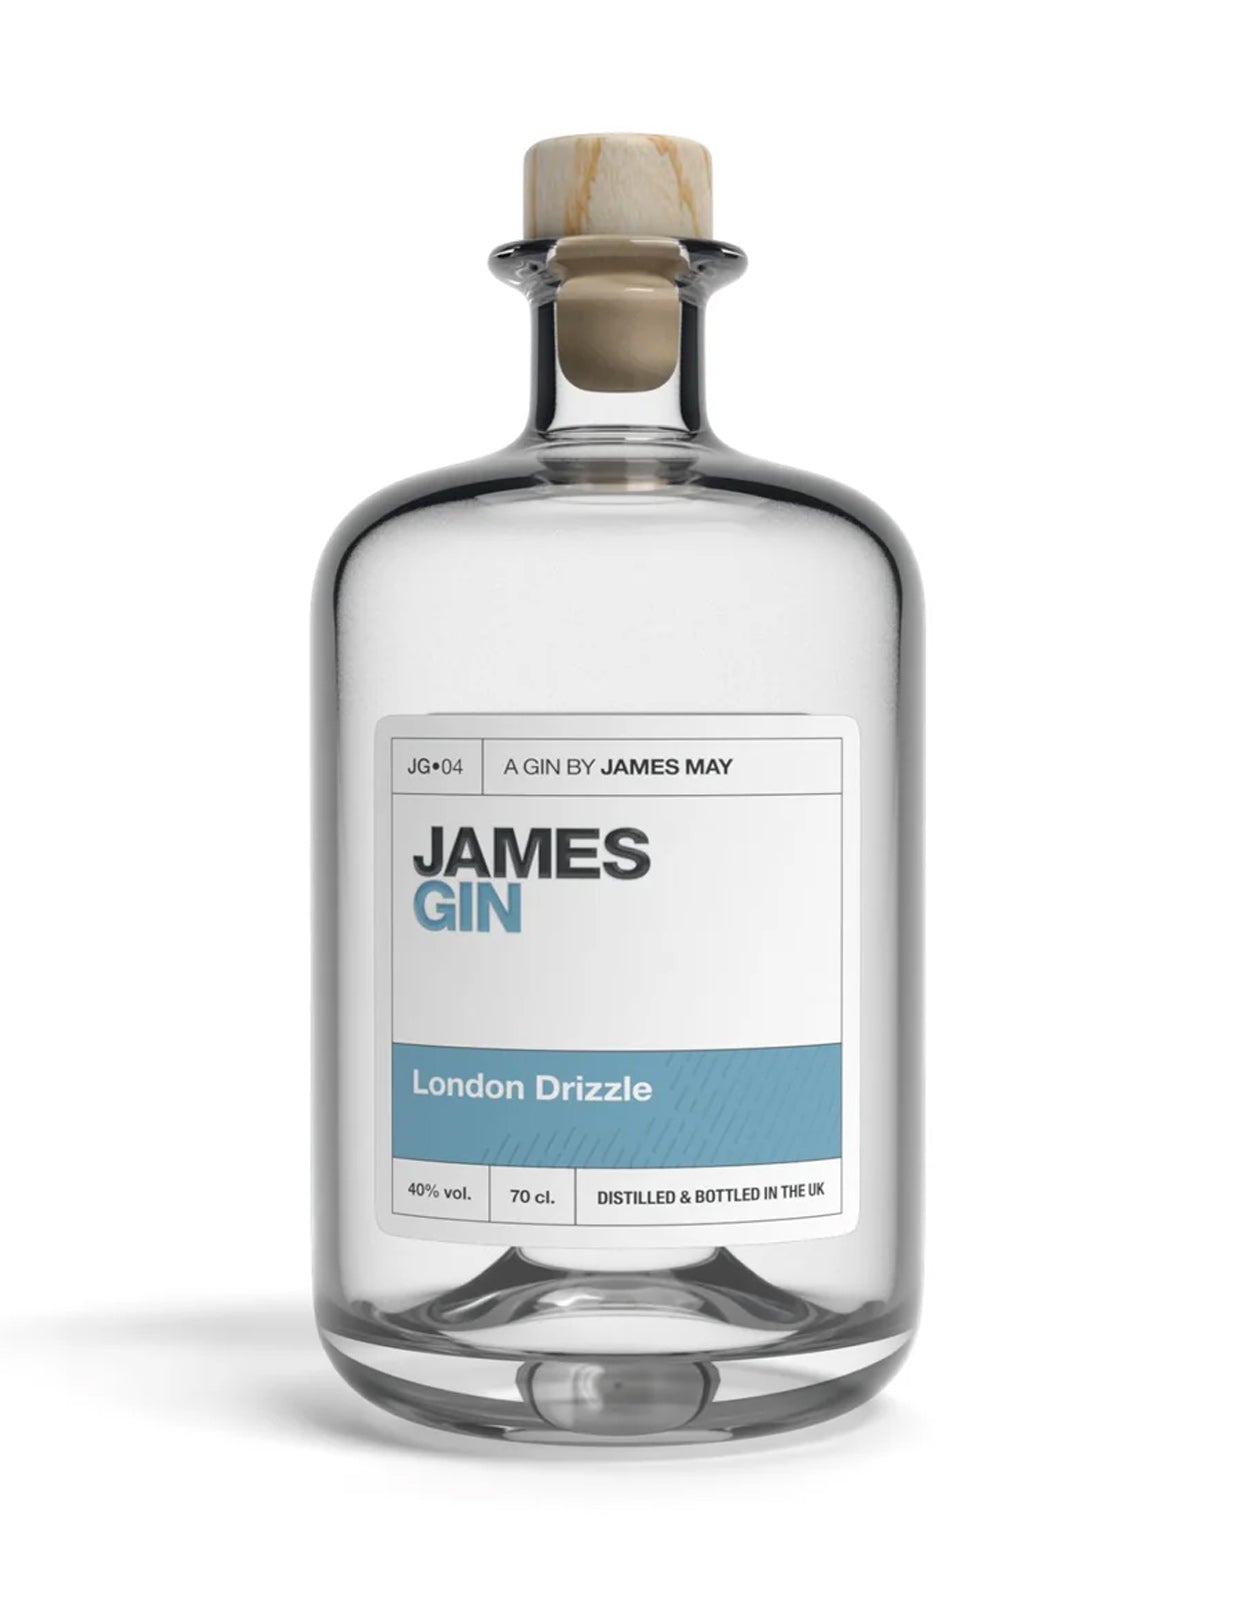 James Gin London Drizzle